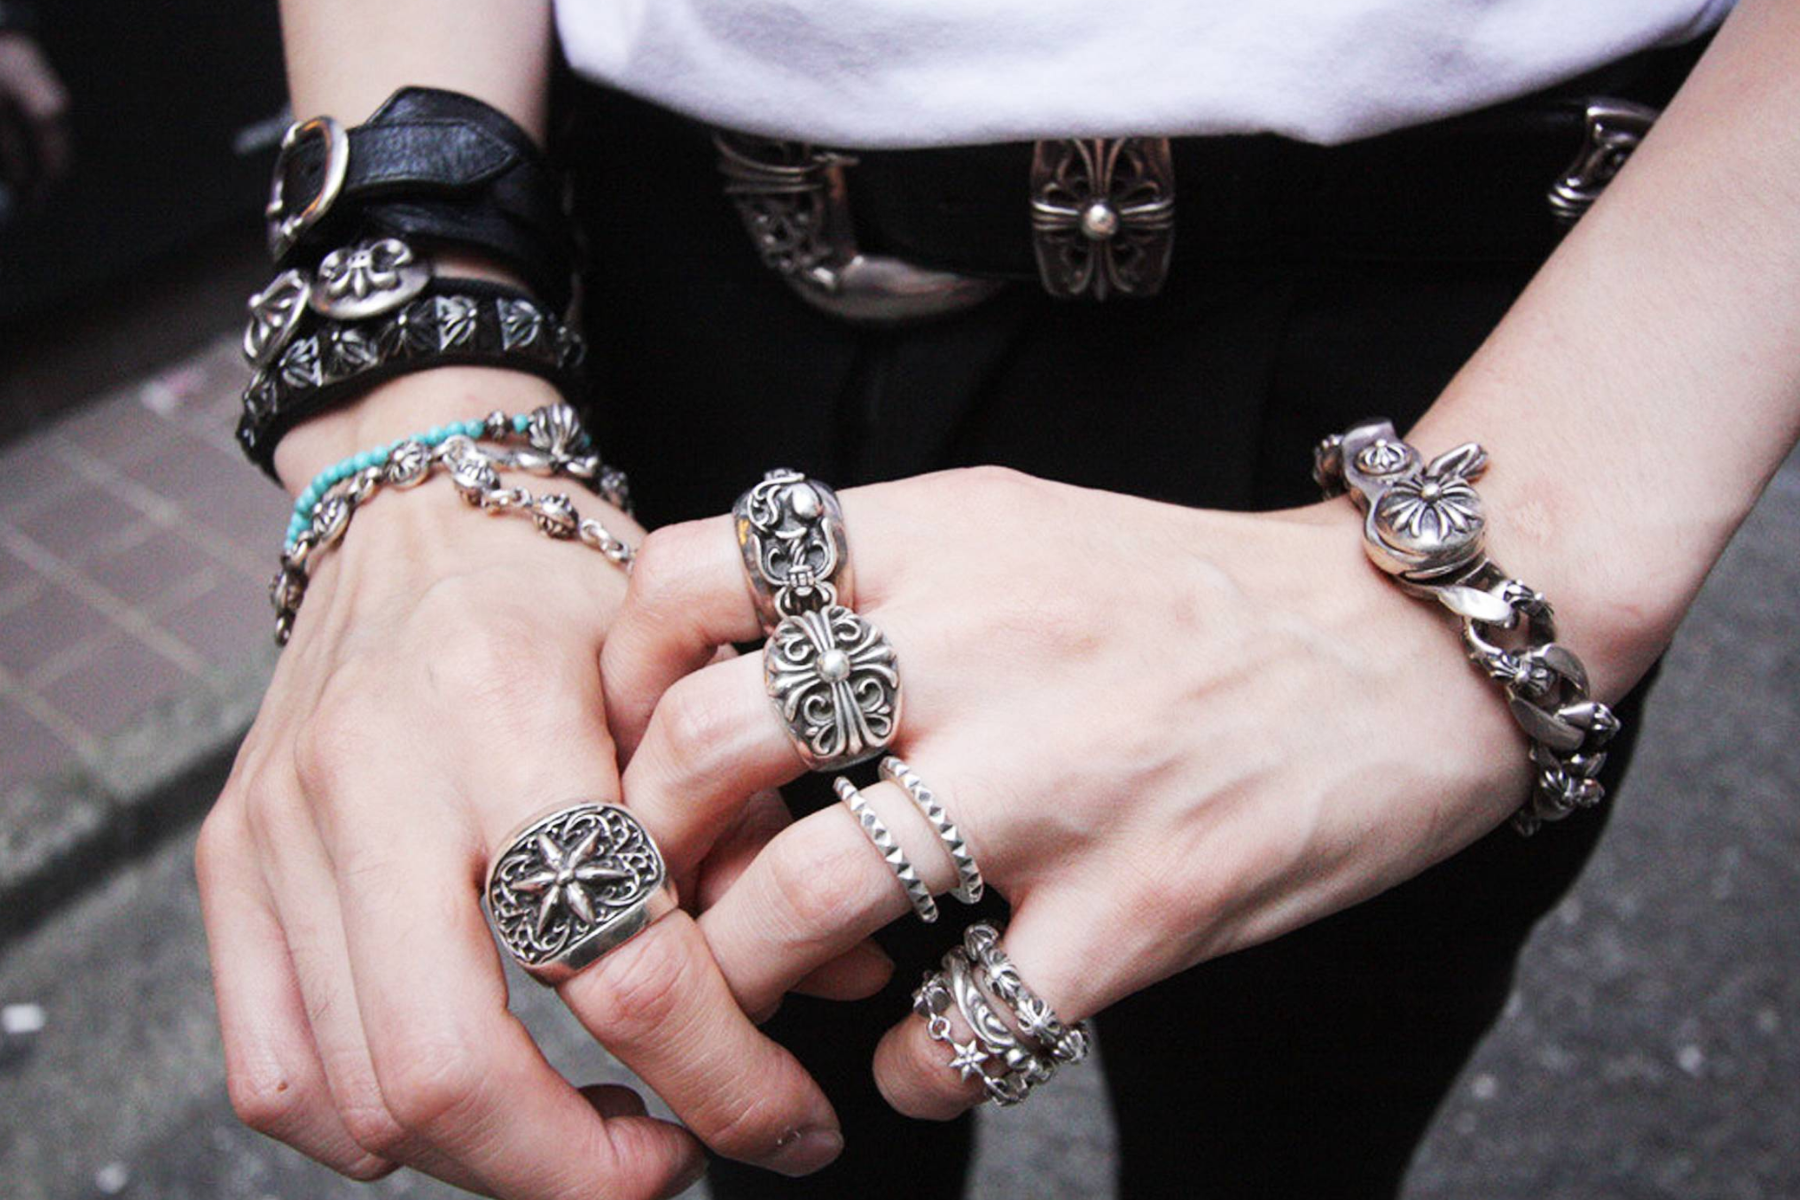 A man's hand adorned with various pieces of silver jewelry